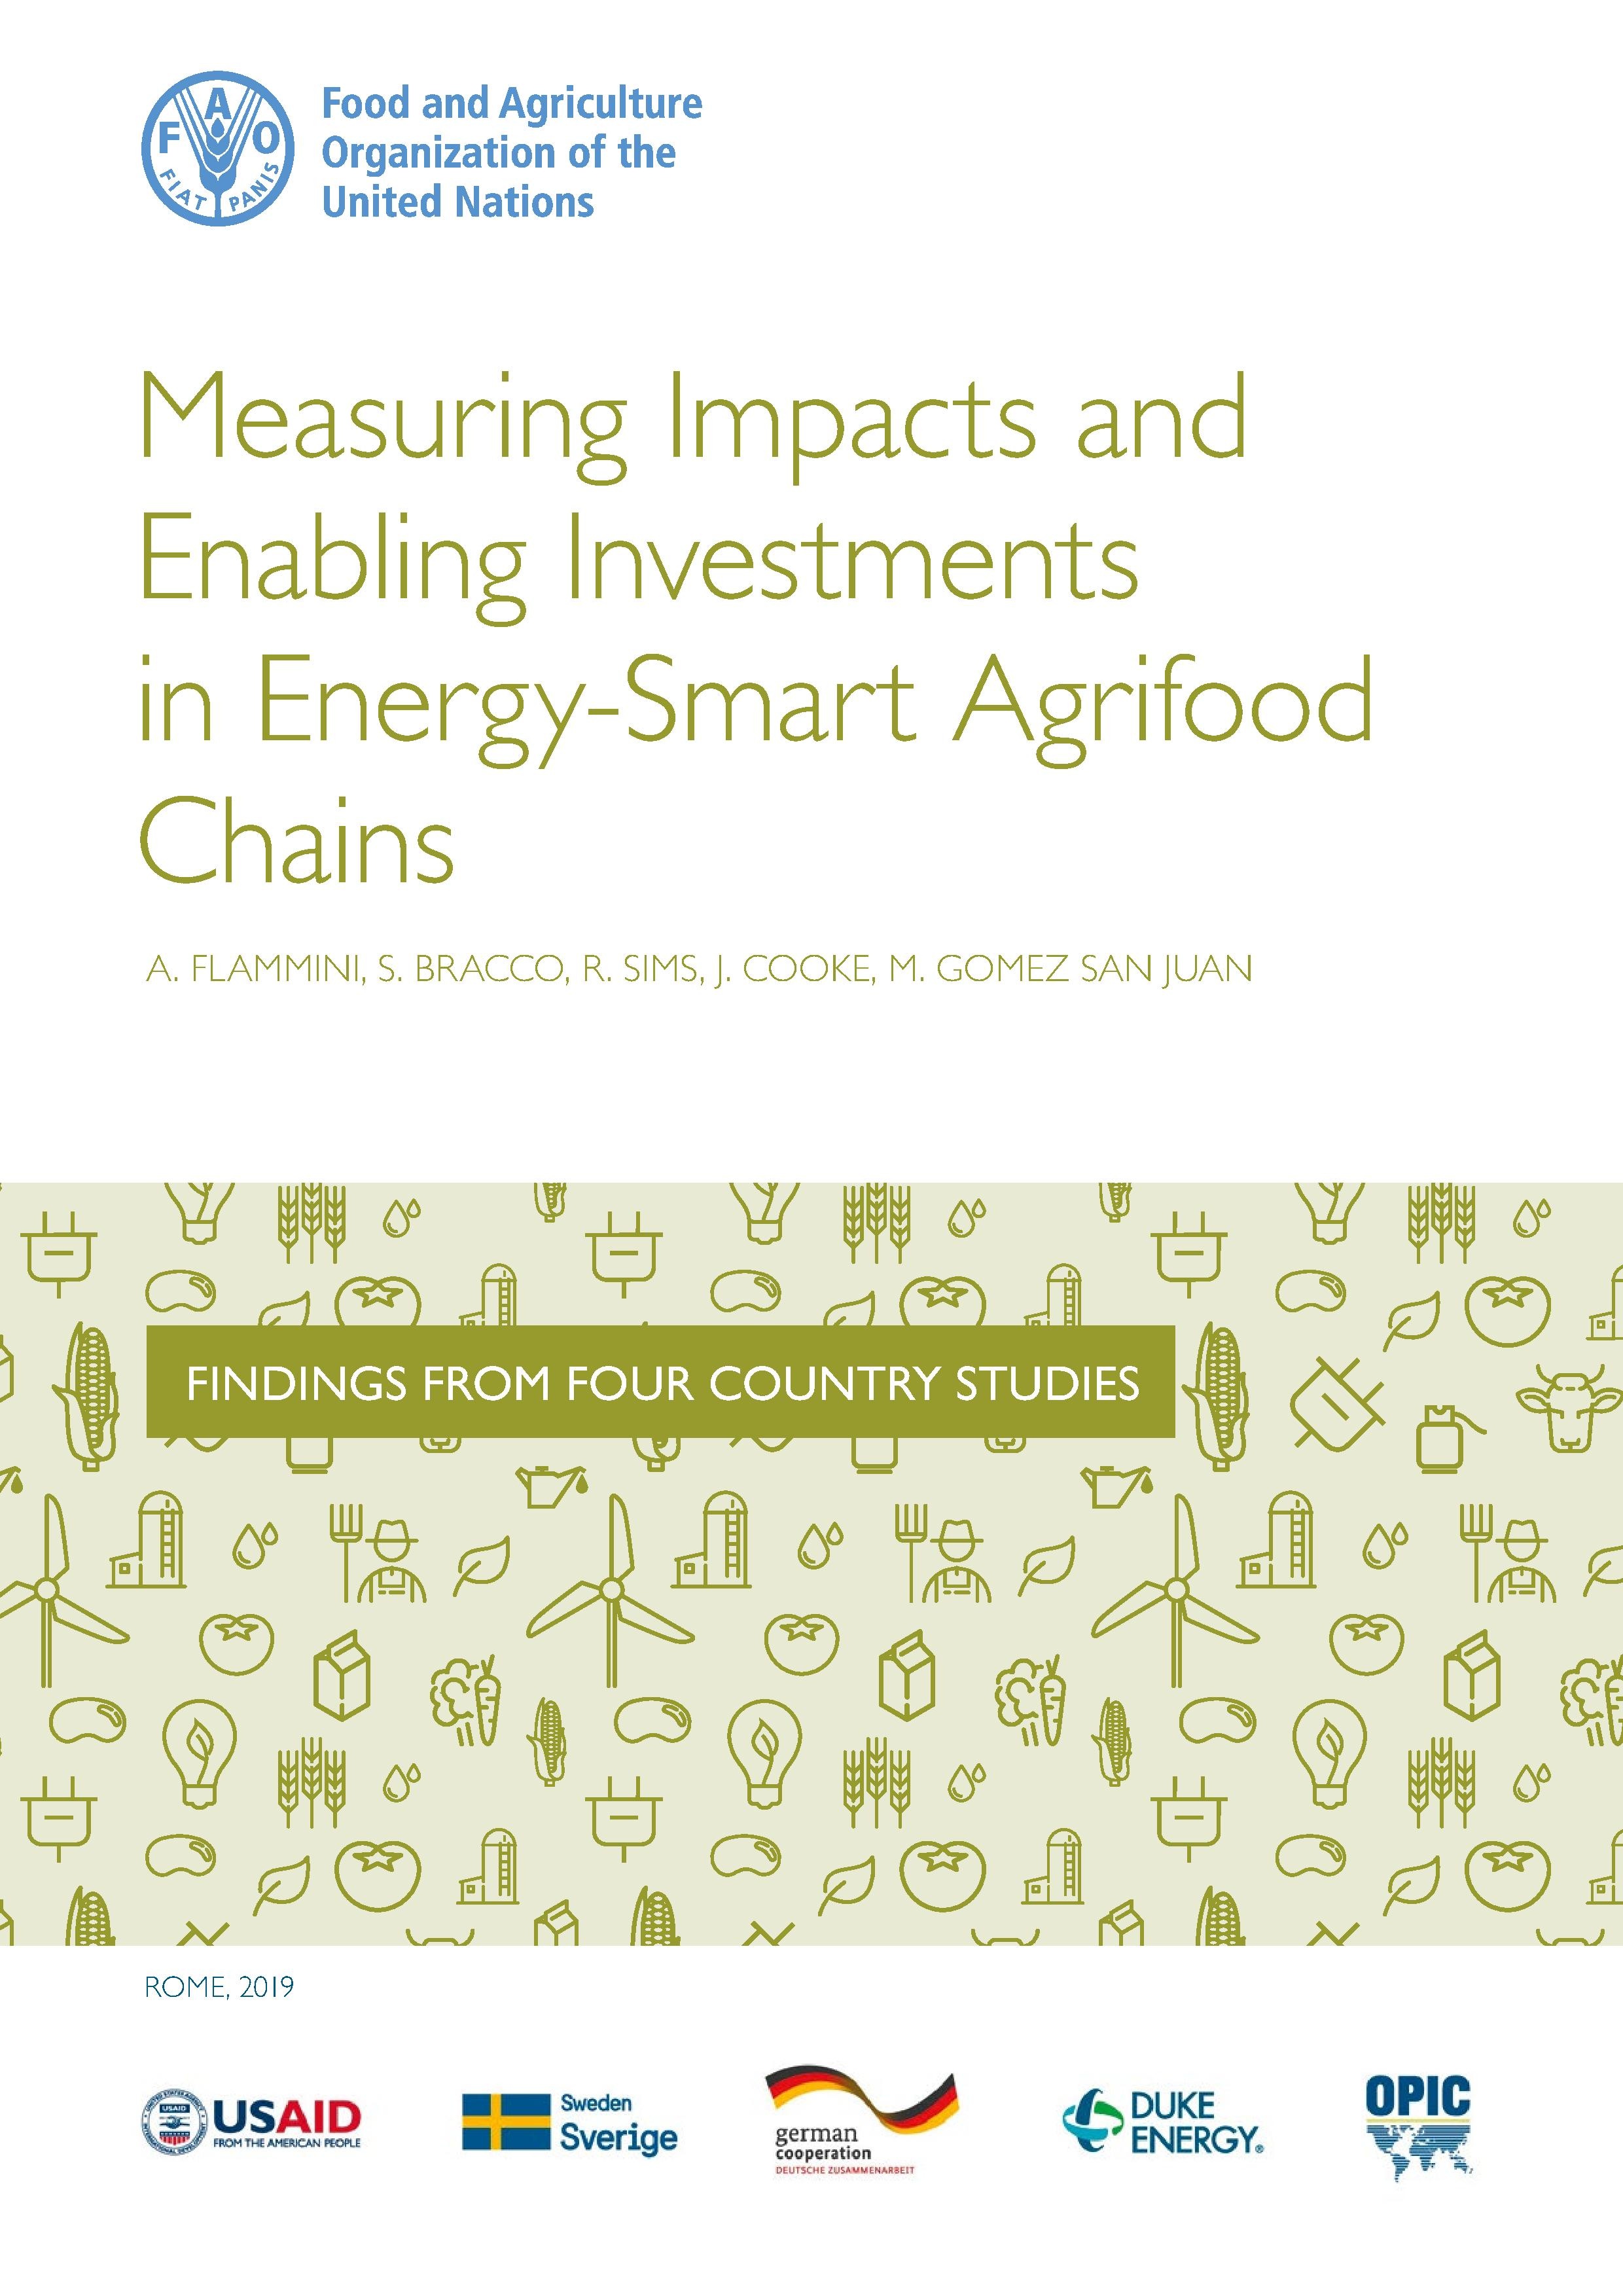 FAO (2019). Measuring Impacts and Enabling Investments in Energy-Smart Agrifood Chains.